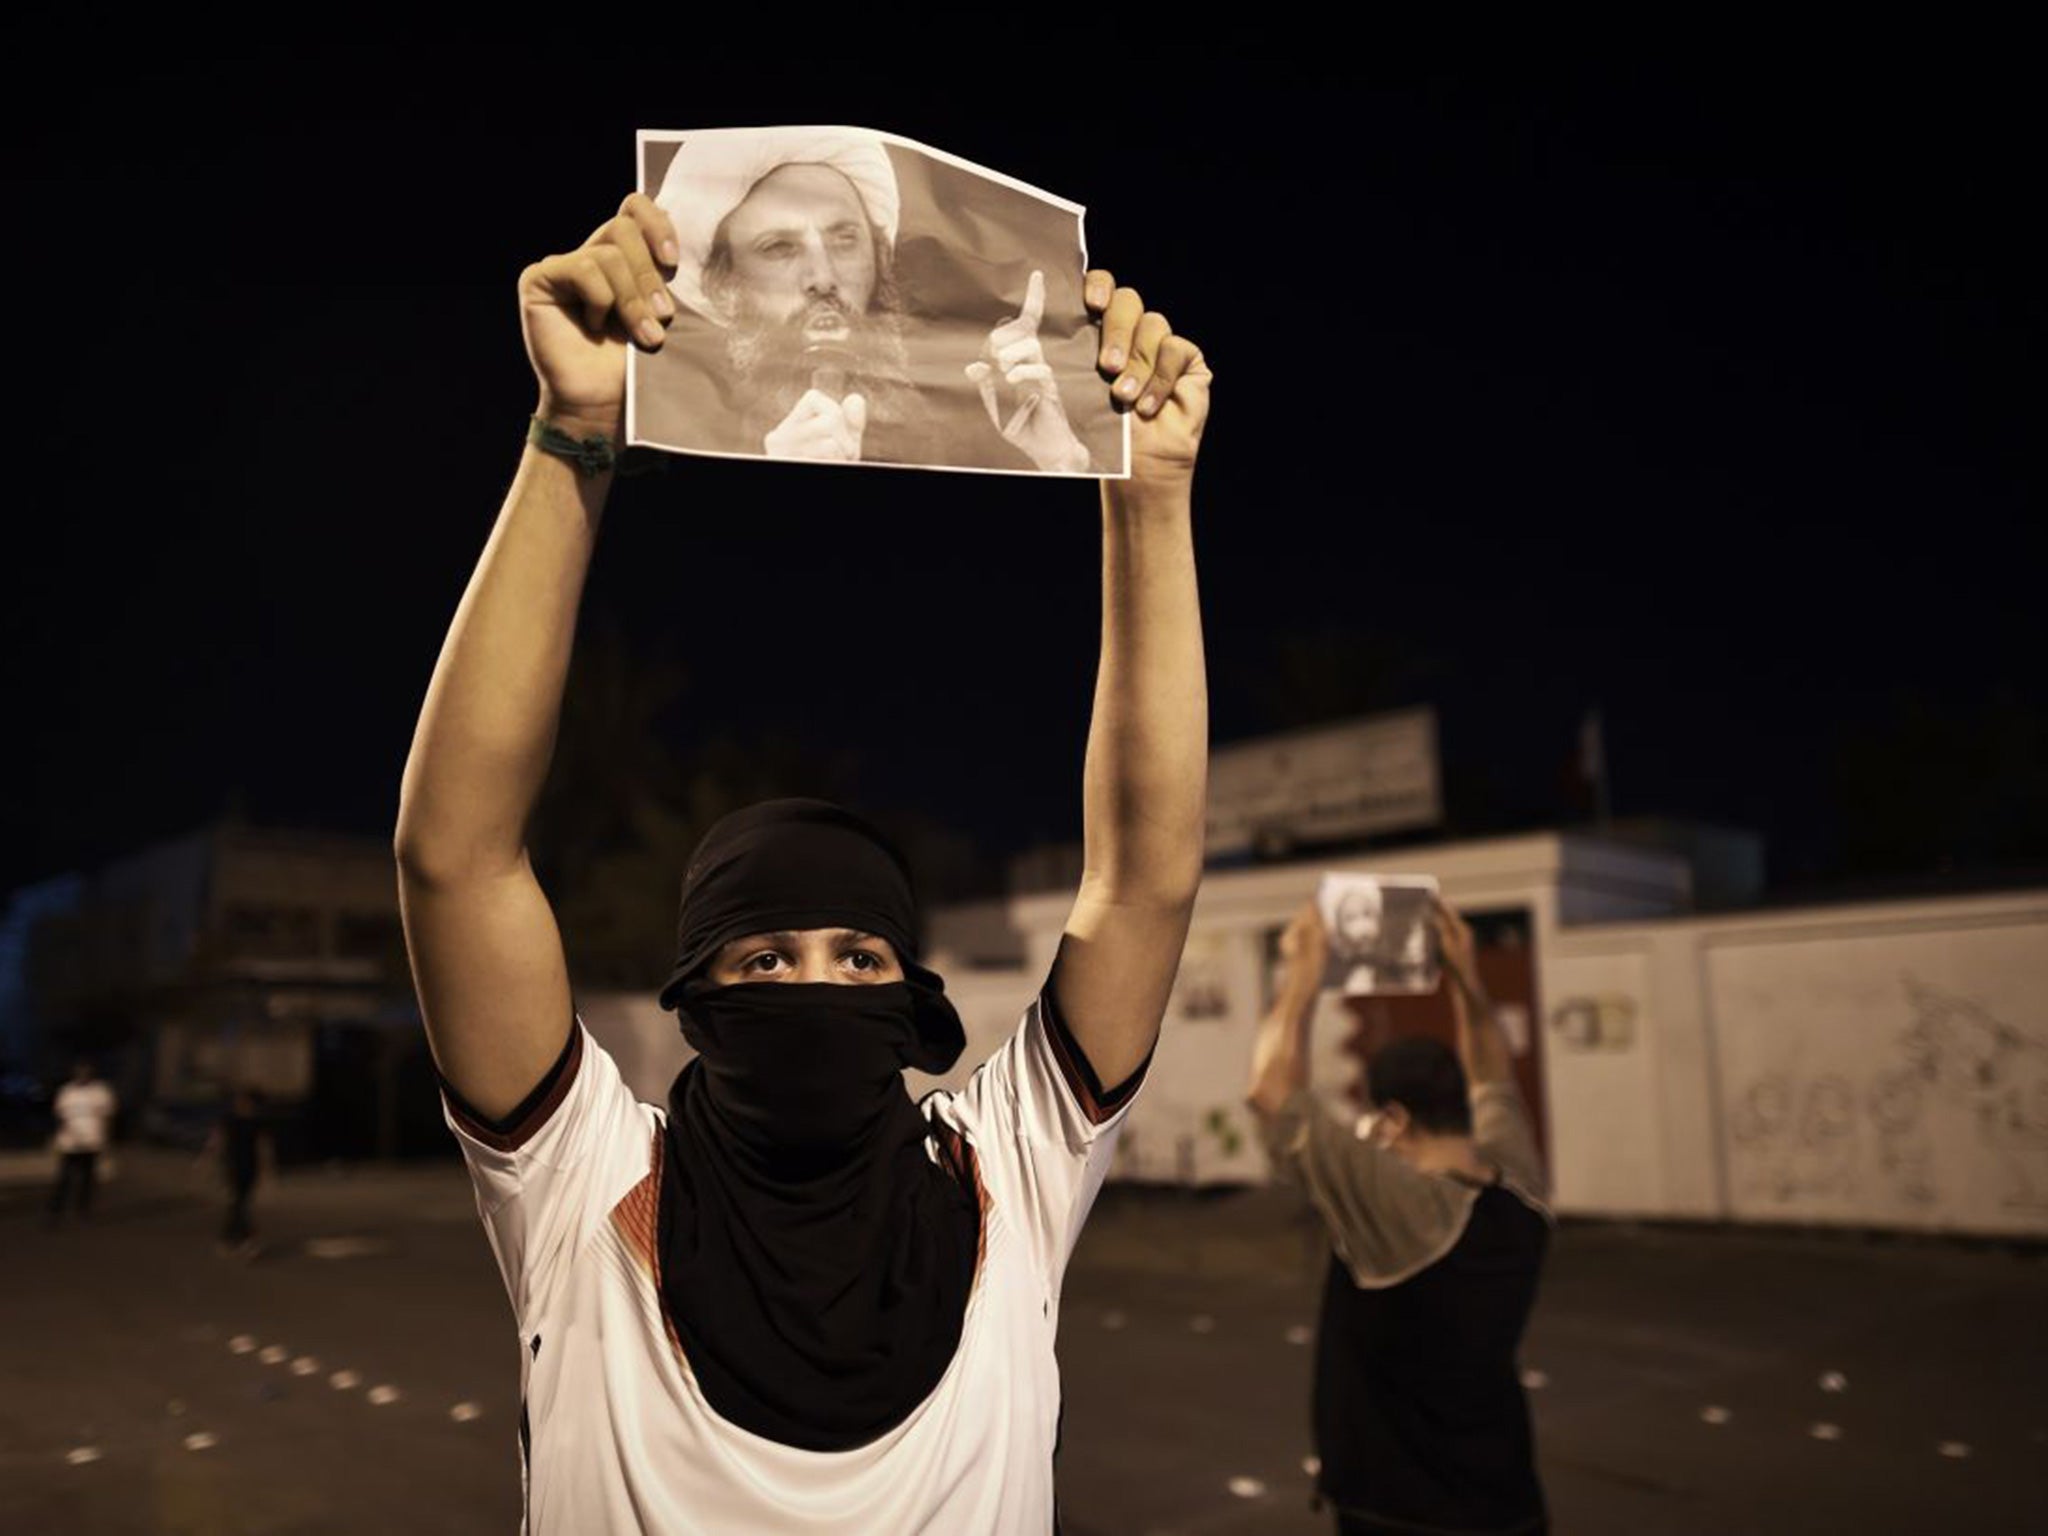 Bahrainis showing solidarity with the Shia cleric Sheikh Nimr al-Nimr